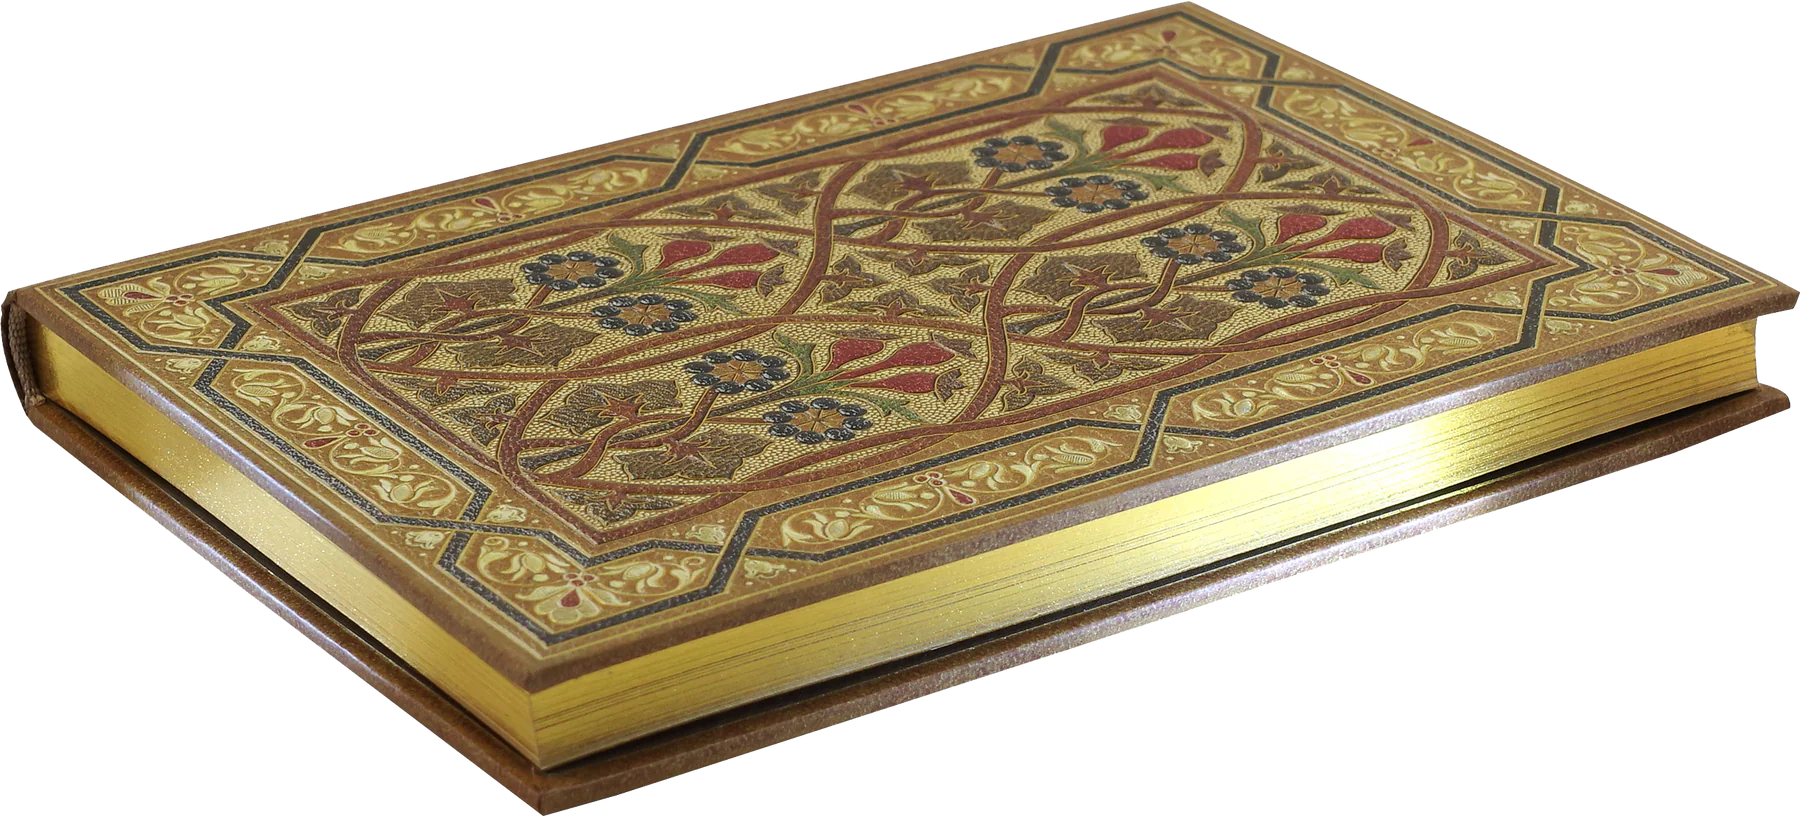 Art nouveau journal front in gold, blue, and red, showing gilt edging